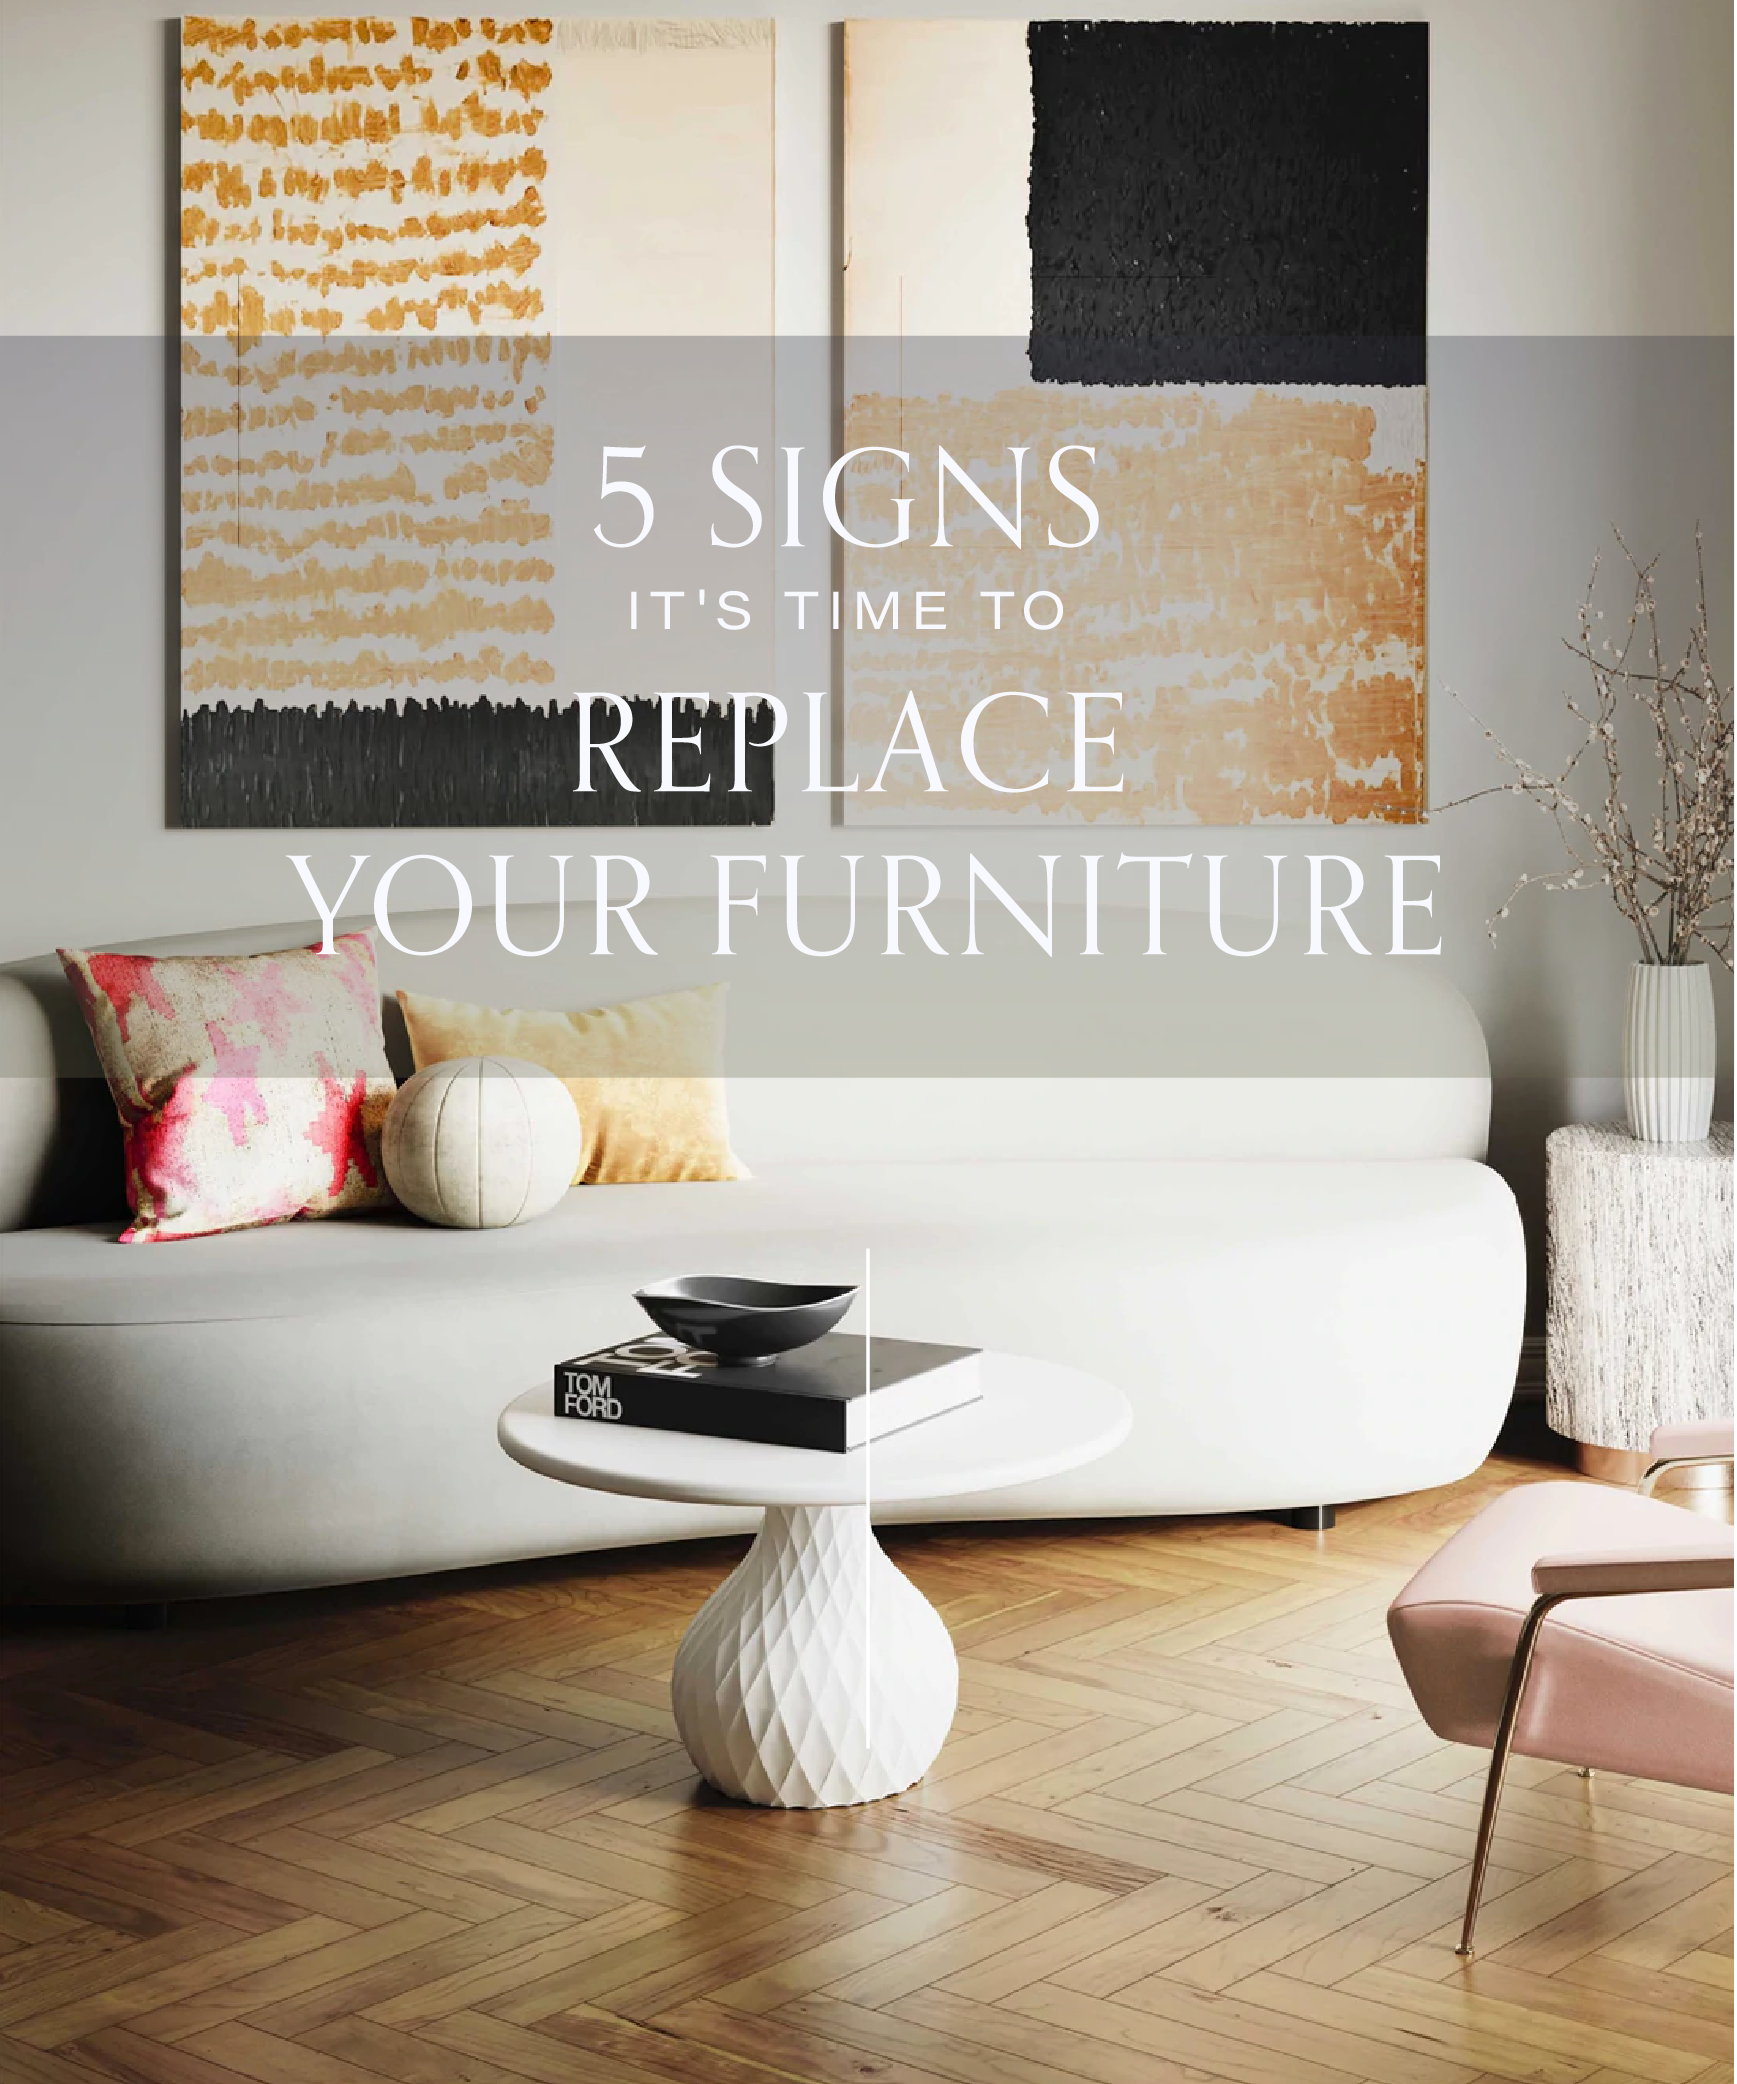 5 Signs It's Time to Replace Your Furniture